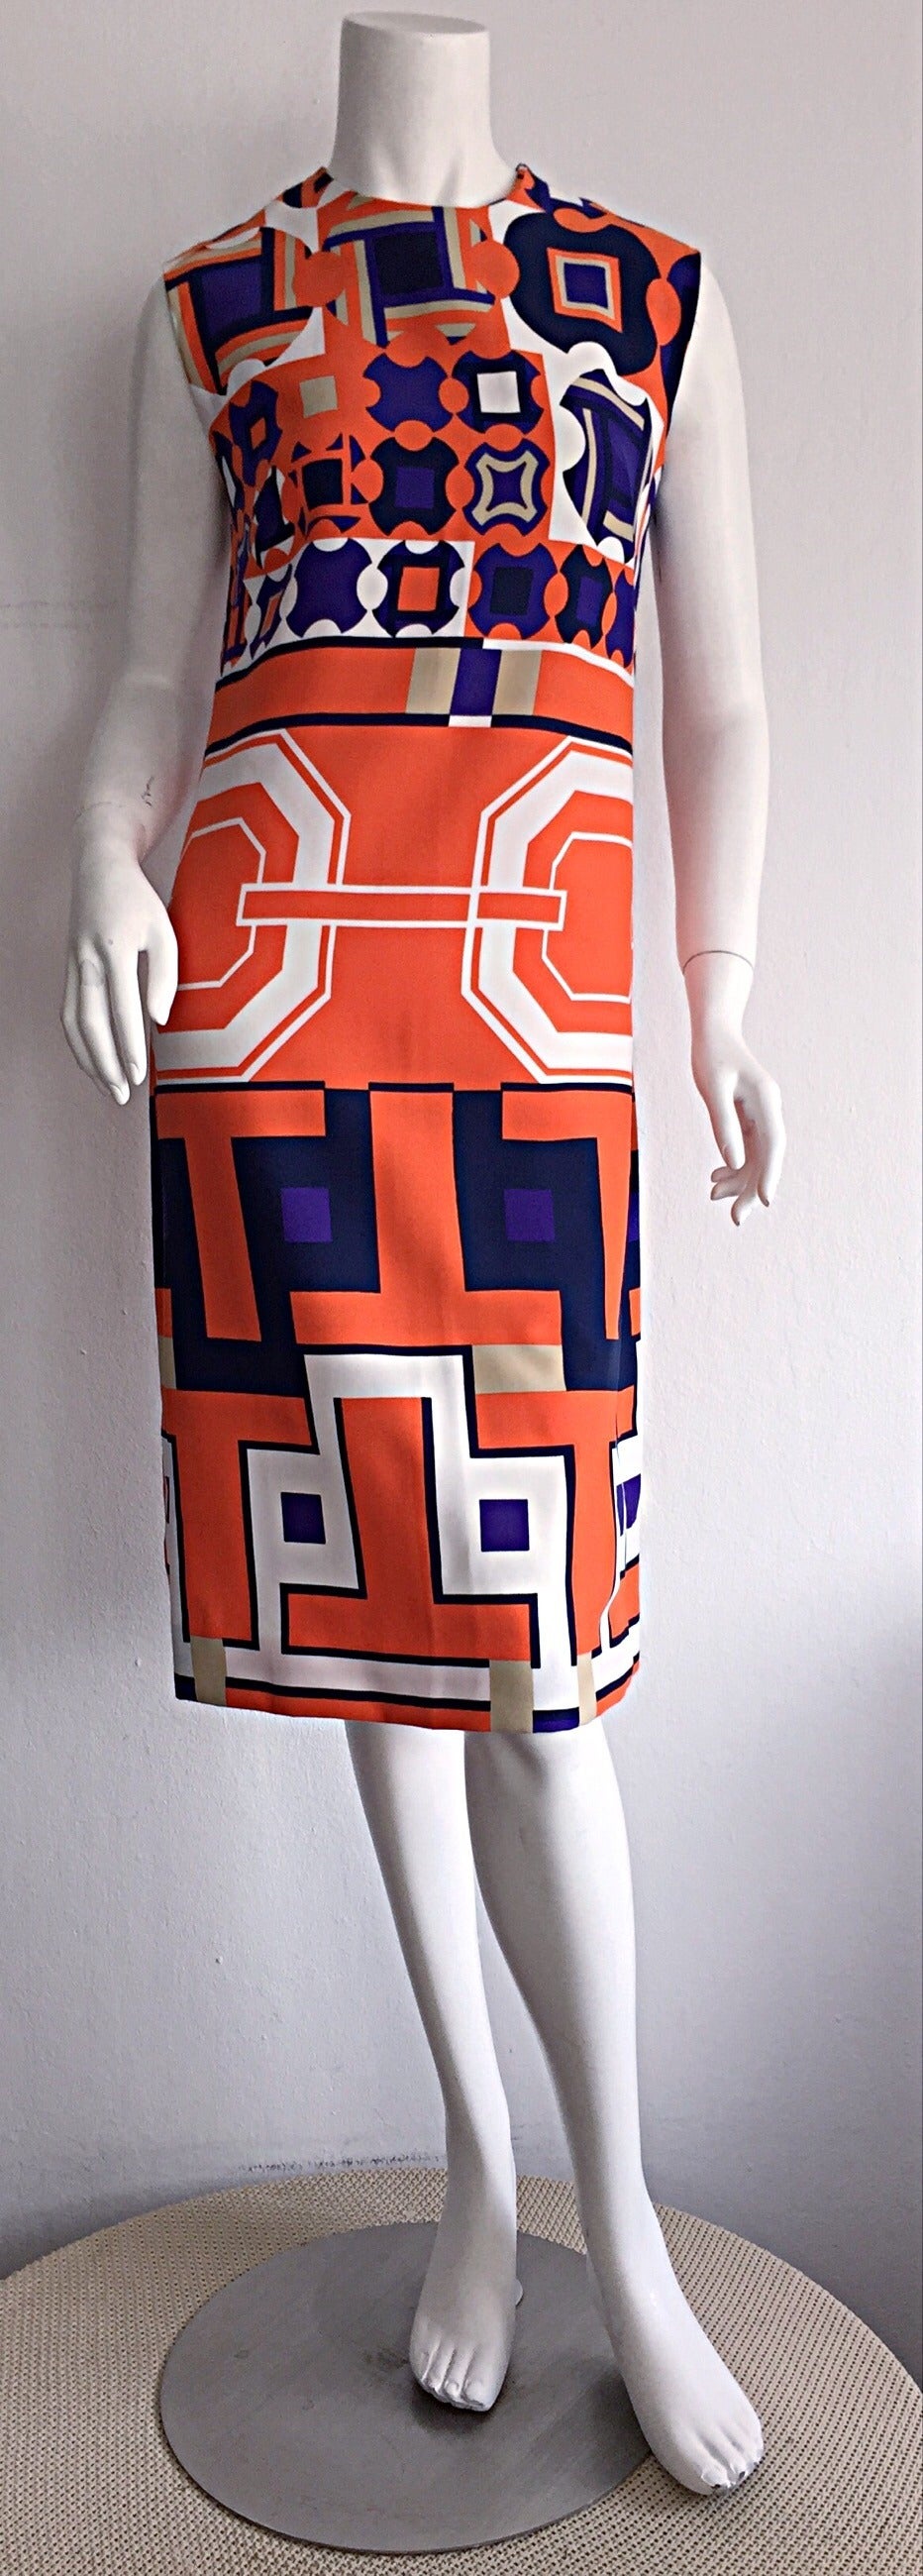 Smashing 60s LANVIN shift dress! Ultra rare print, that Lanvin was so famous for creating! Chic hidden logo print on skirt of dress. Beautiful colors, with impressive 3-D effect. Easily goes from day to night, with sandals, wedges, boots, or heels.